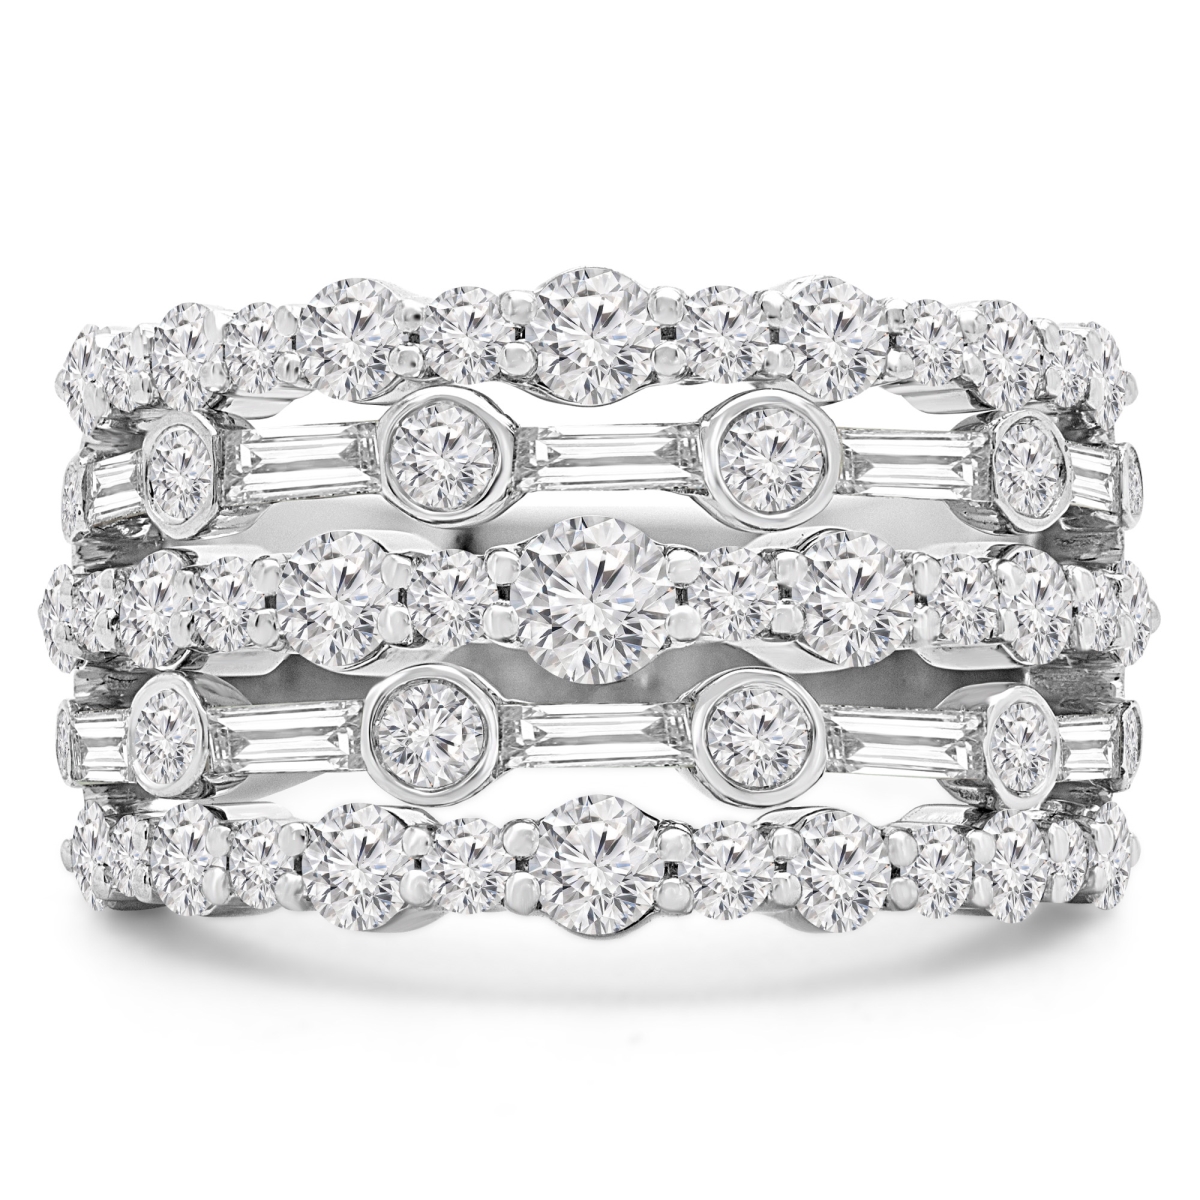 2.125 Ctw Round Diamond Vintage Five-row Cocktail Ring In 18k White Gold - Size 3.75